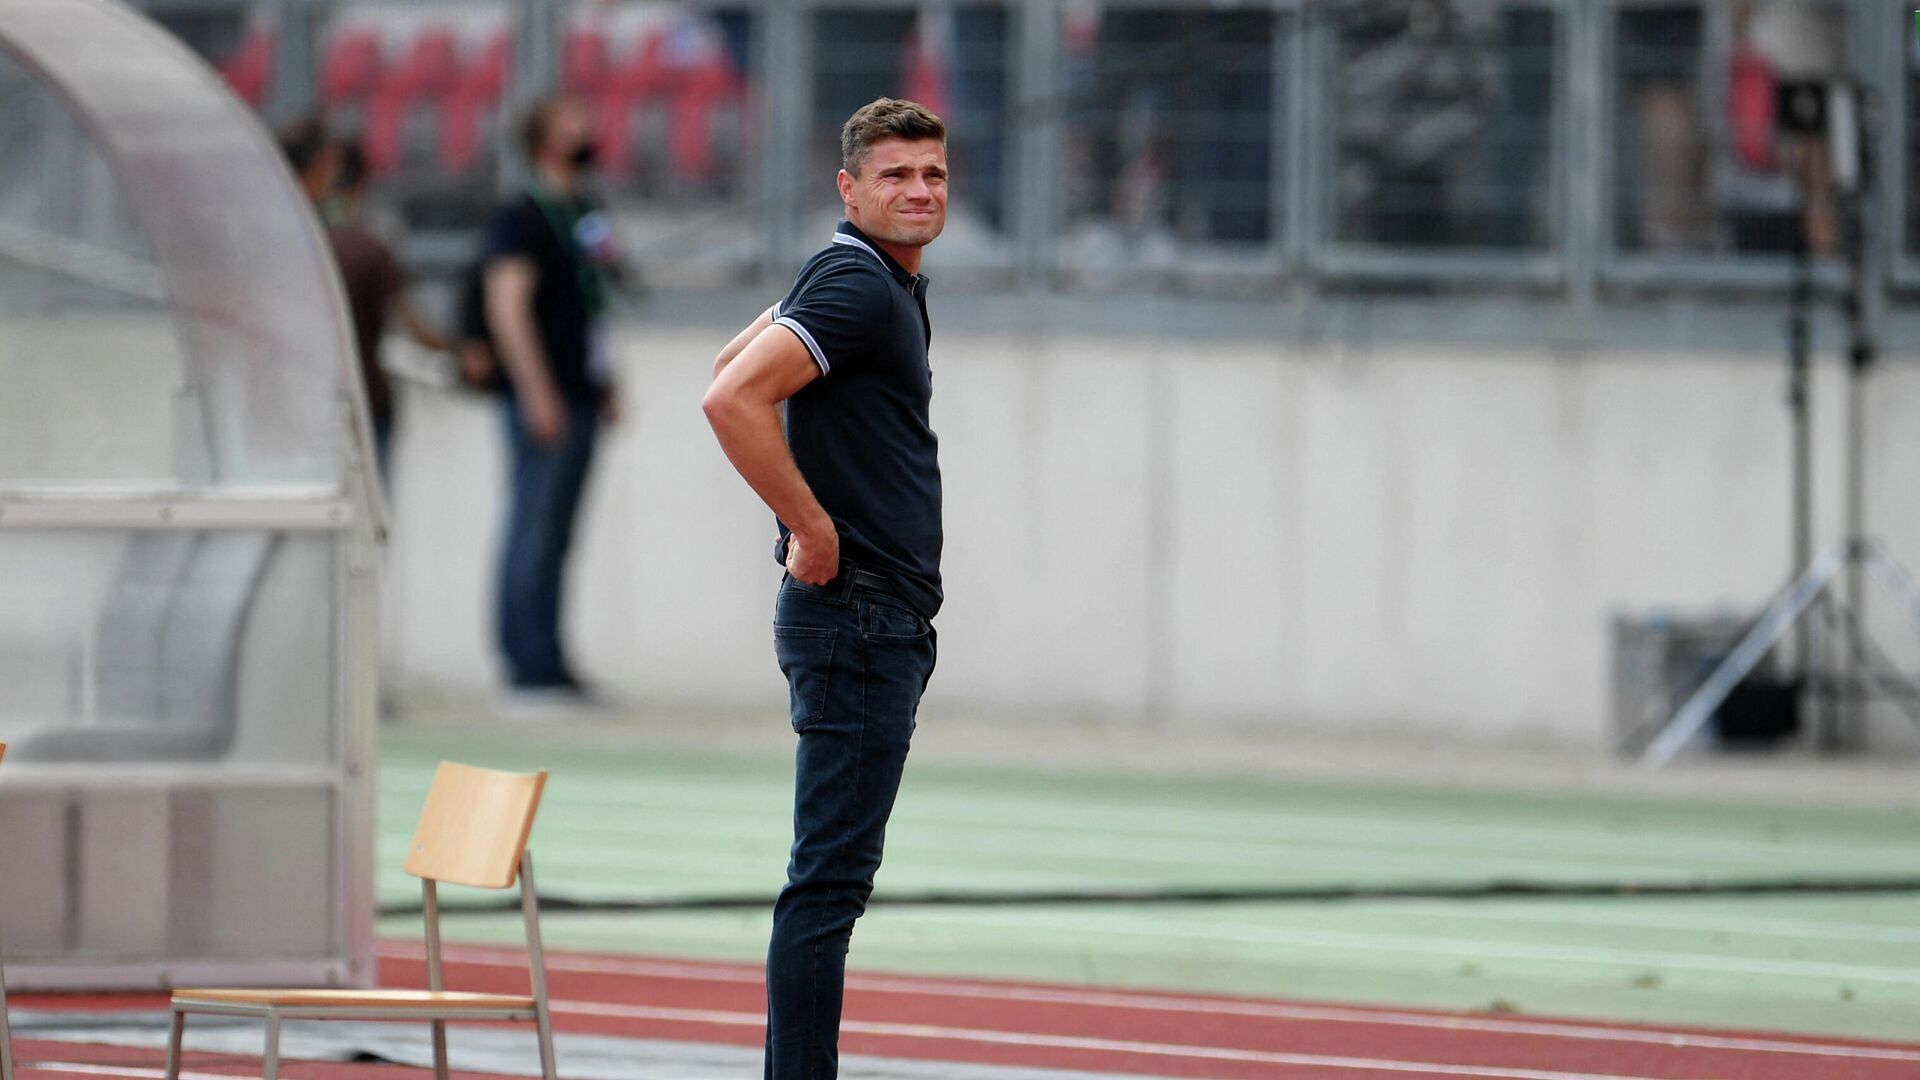 Nuremberg's German head coach Robert Klauss is pictured prior to the first round match of the German Cup of the DFB German Football Association (Deutscher Fussball-Bund) FC Nuremberg vs RB Leipzig on September 12, 2020 at the Max-Morlock stadium in Nuremberg, southern Germany. (Photo by ANDREAS GEBERT / POOL / AFP) / DFB REGULATIONS PROHIBIT ANY USE OF PHOTOGRAPHS AS IMAGE SEQUENCES AND/OR QUASI-VIDEO. - РИА Новости, 1920, 04.10.2021